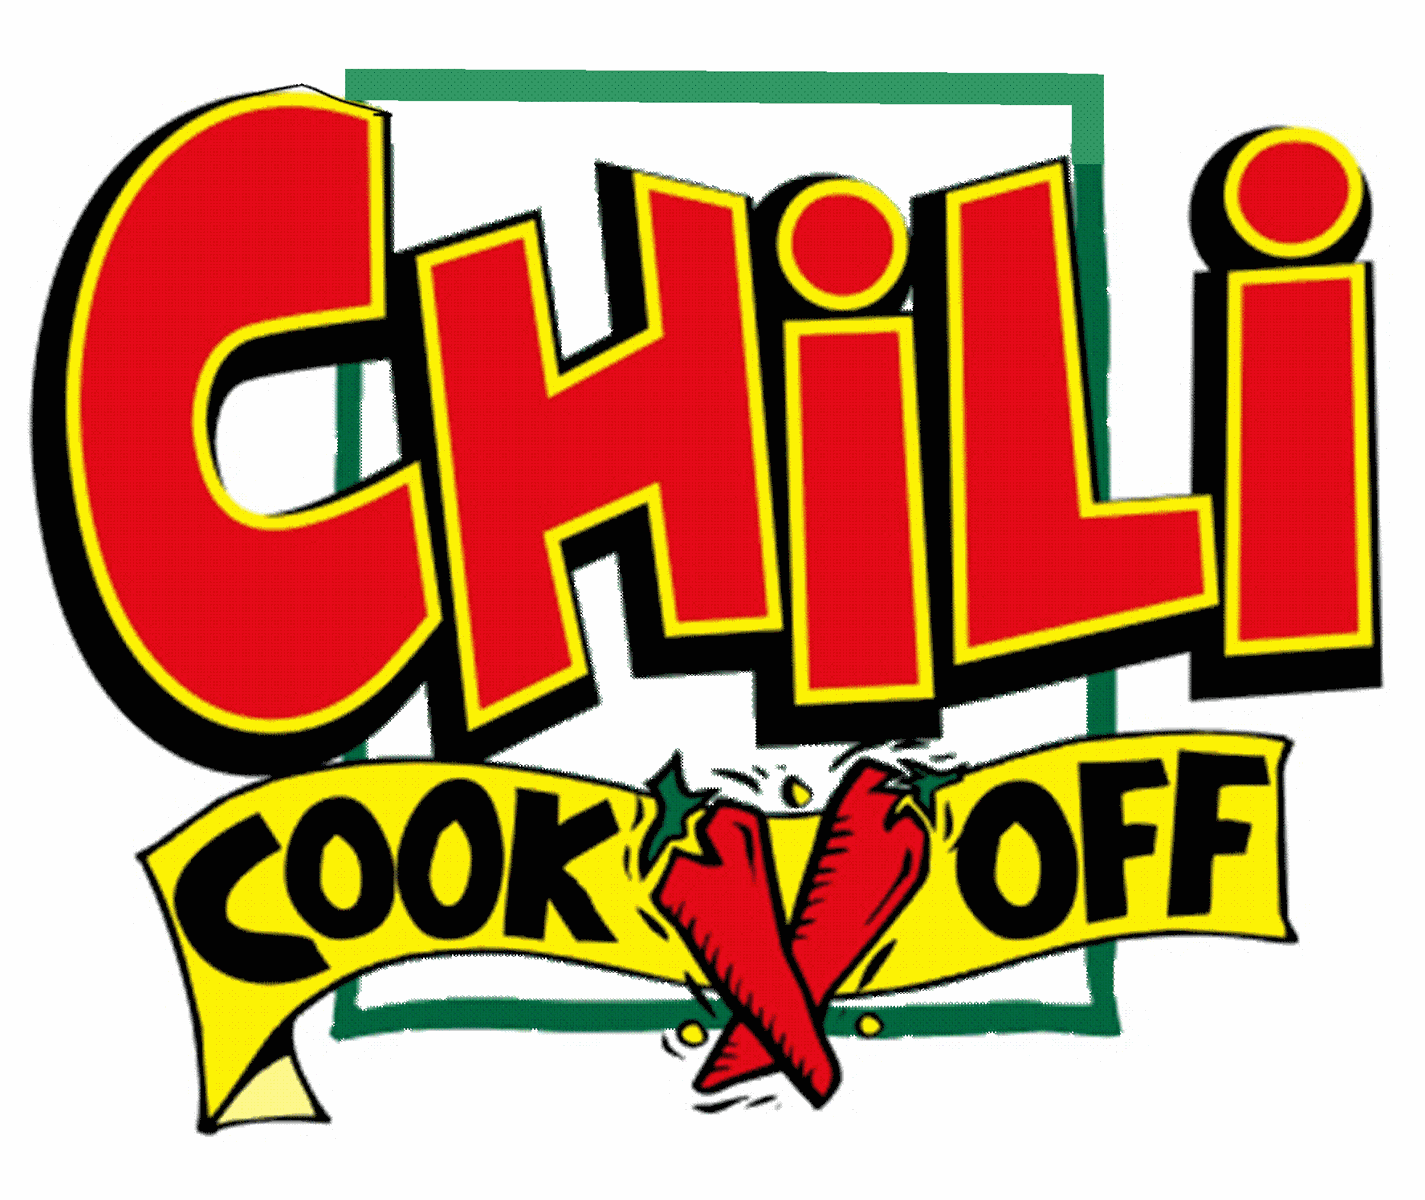 ... Chili Cookoff Clip Art - ClipArt Best ...